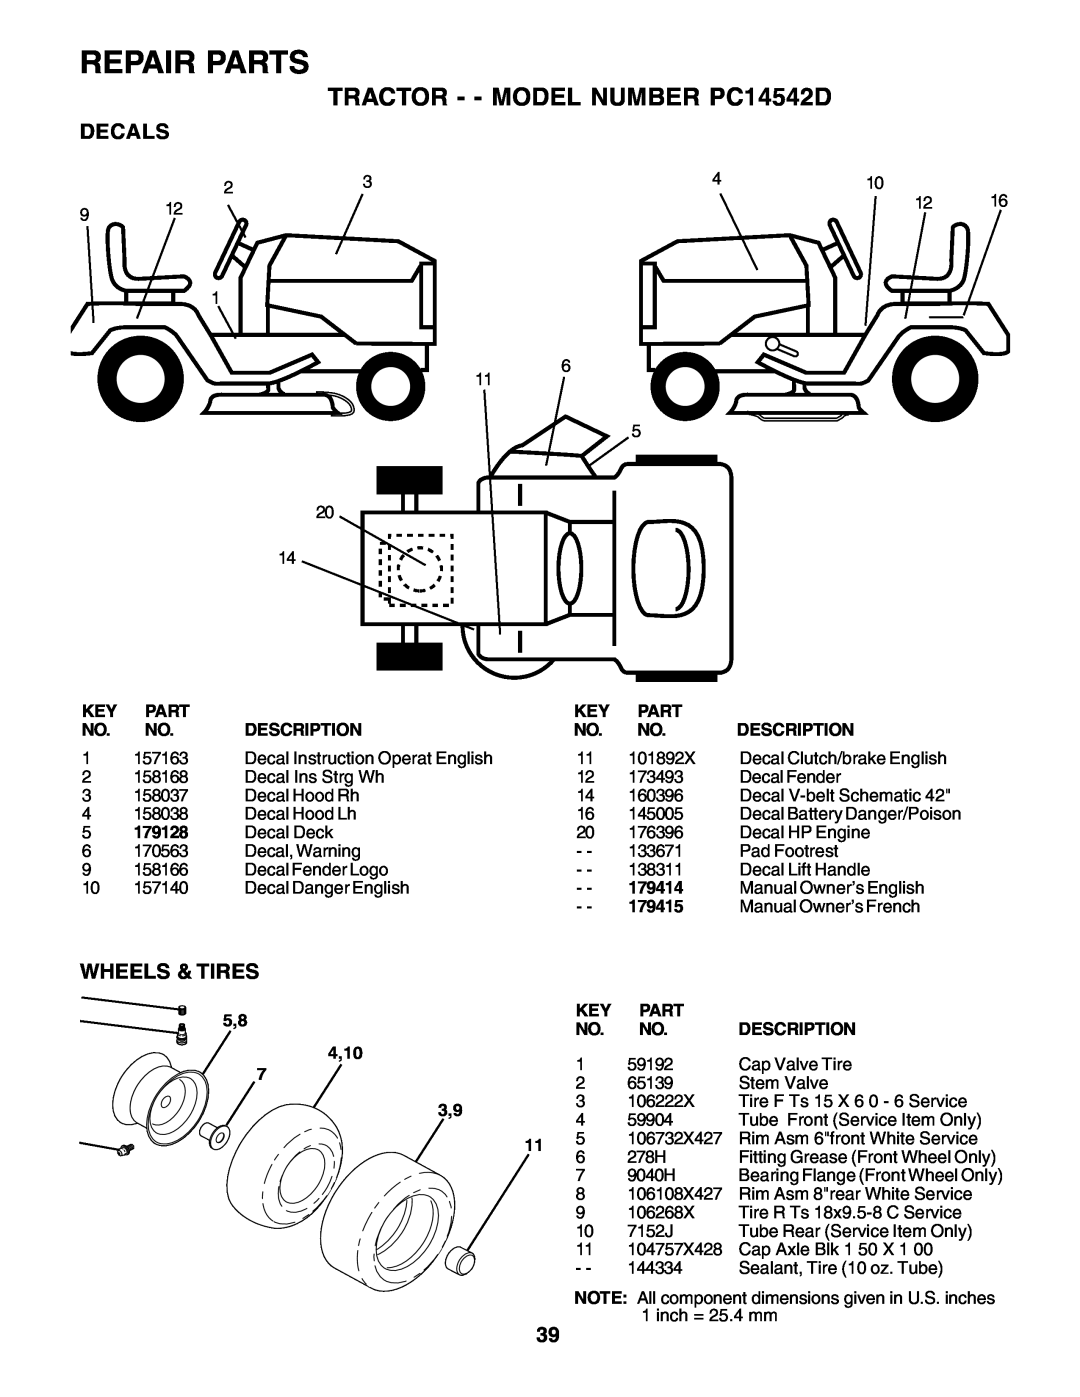 Poulan owner manual Repair Parts, TRACTOR - - MODEL NUMBER PC14542D, Decals, Wheels & Tires 